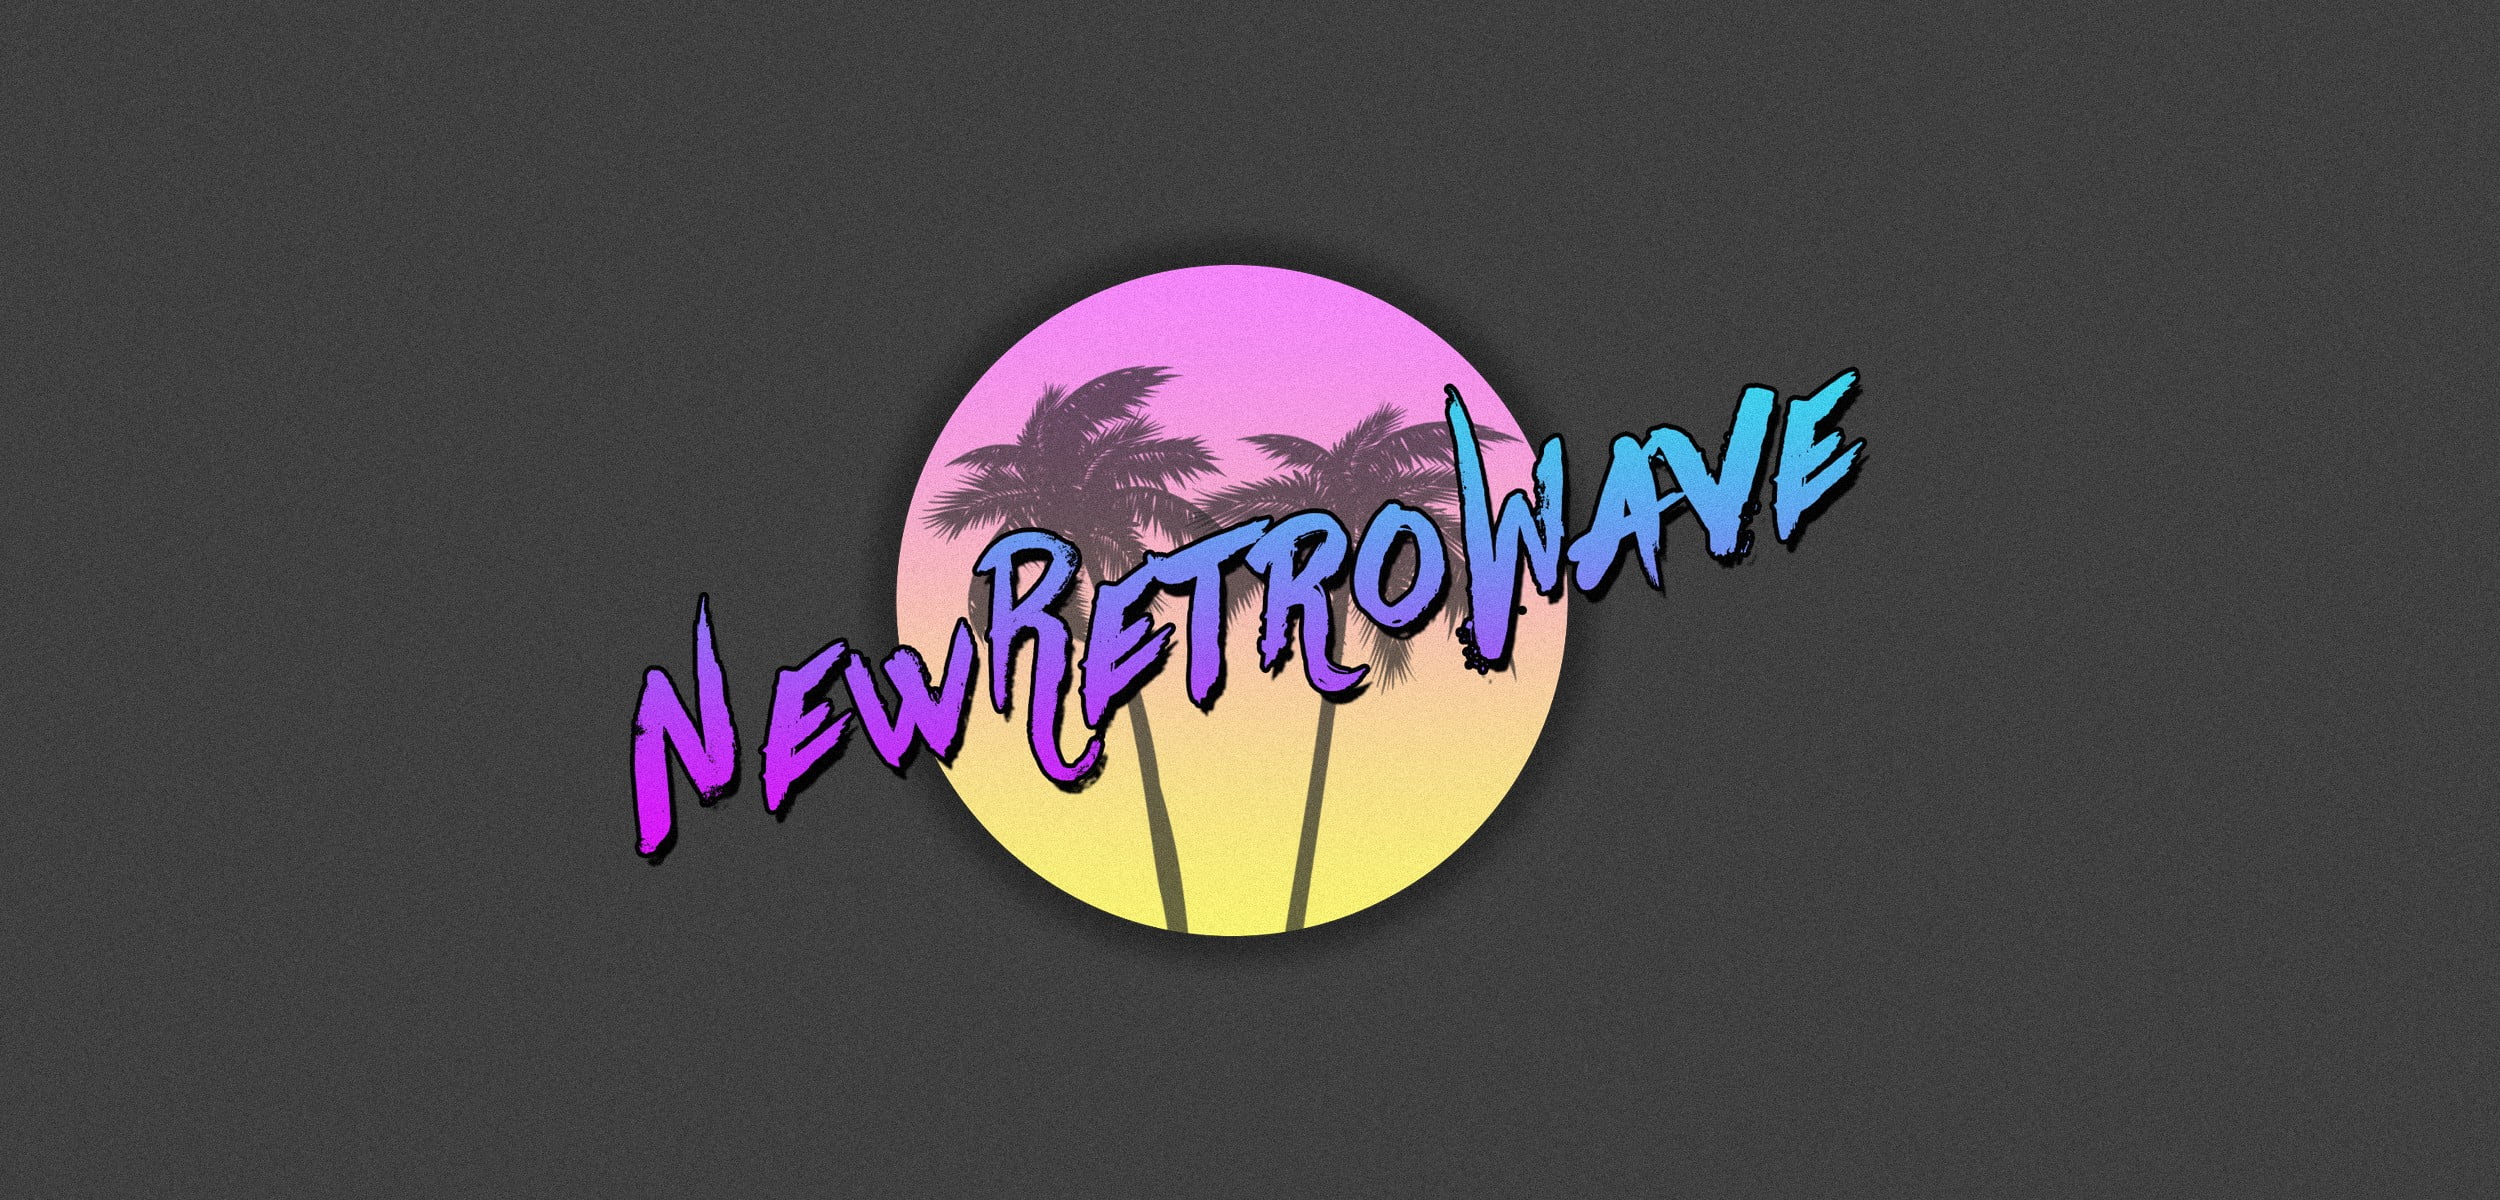 New Retro Wave text, vintage, New Retro Wave, 1980s, synthwave